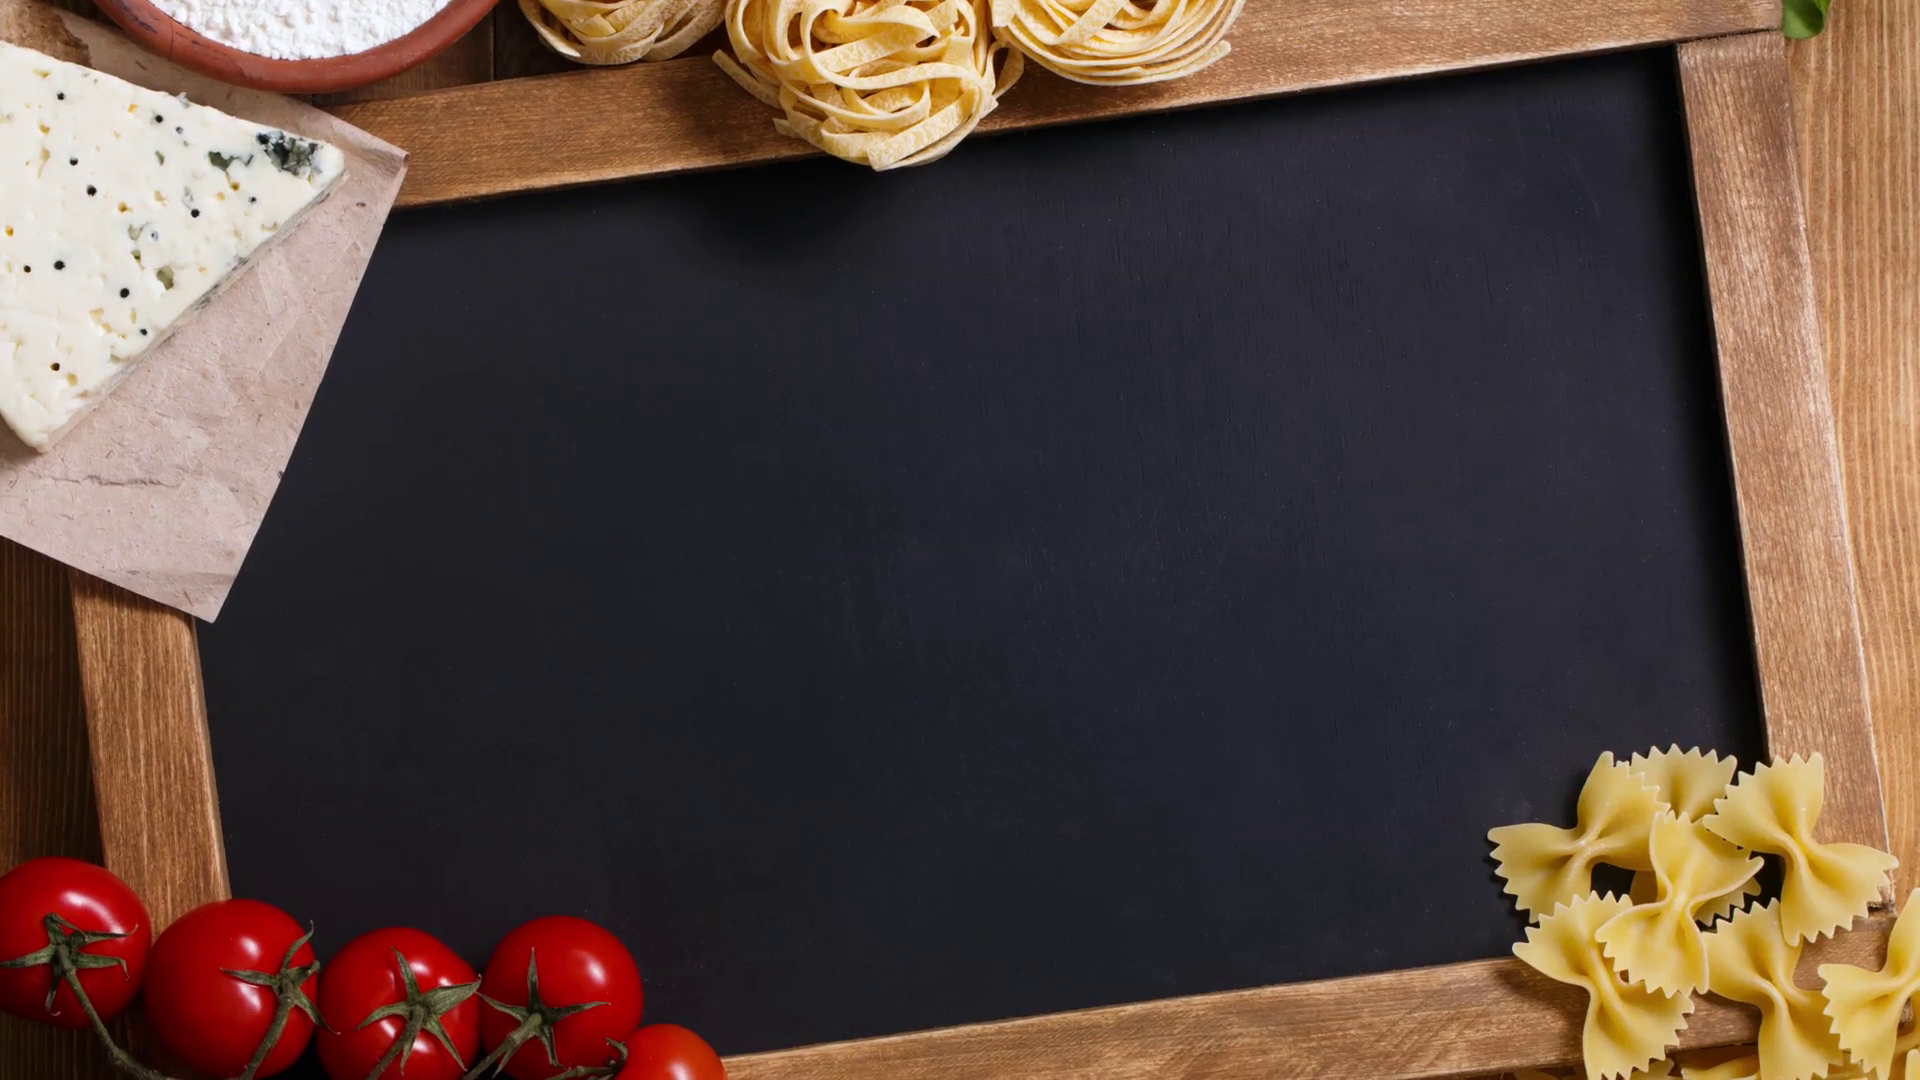 Italian food on vintage wood background, with chalkboard, with ...